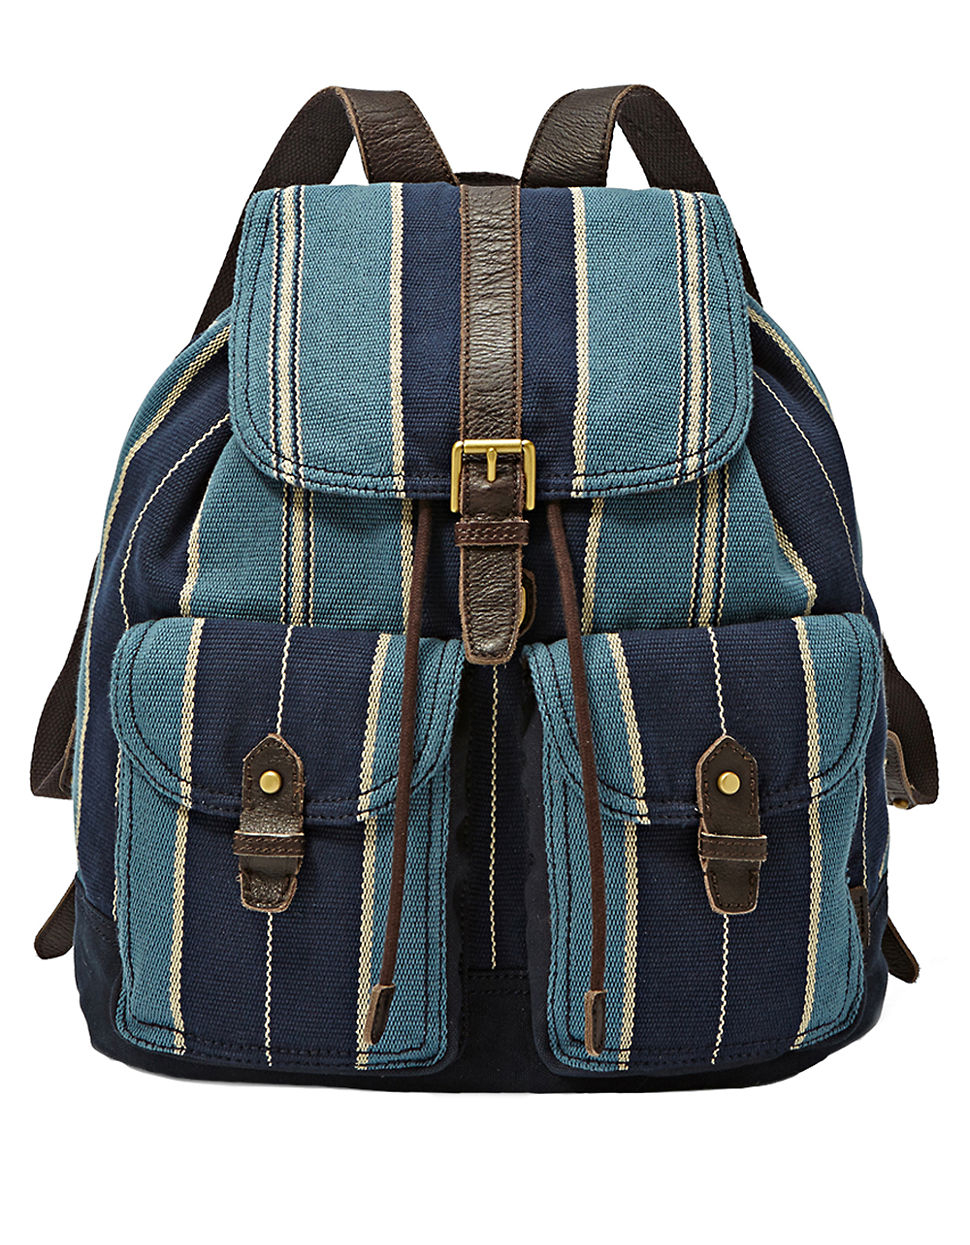 Lyst - Fossil Estate Striped Canvas Backpack in Blue for Men